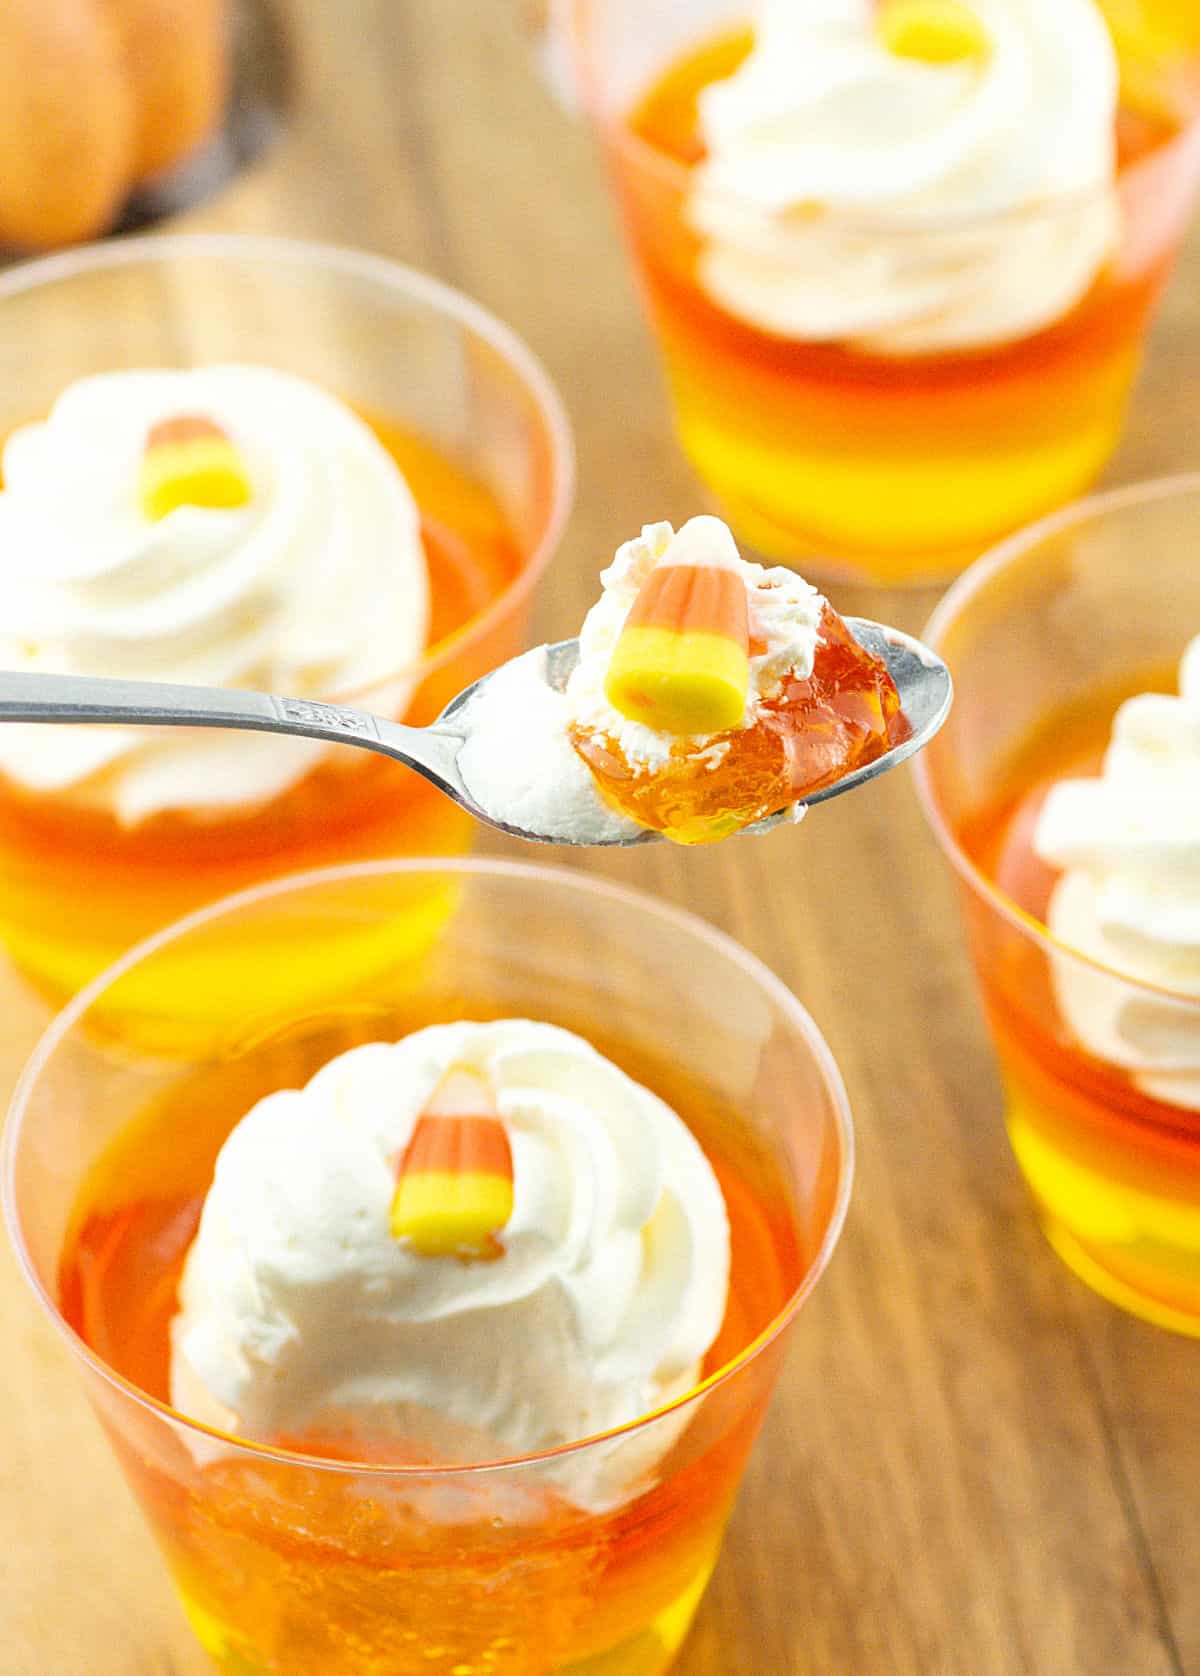 Spoon with candy corn jello shot. More jello cups beneath on a wooden surface.